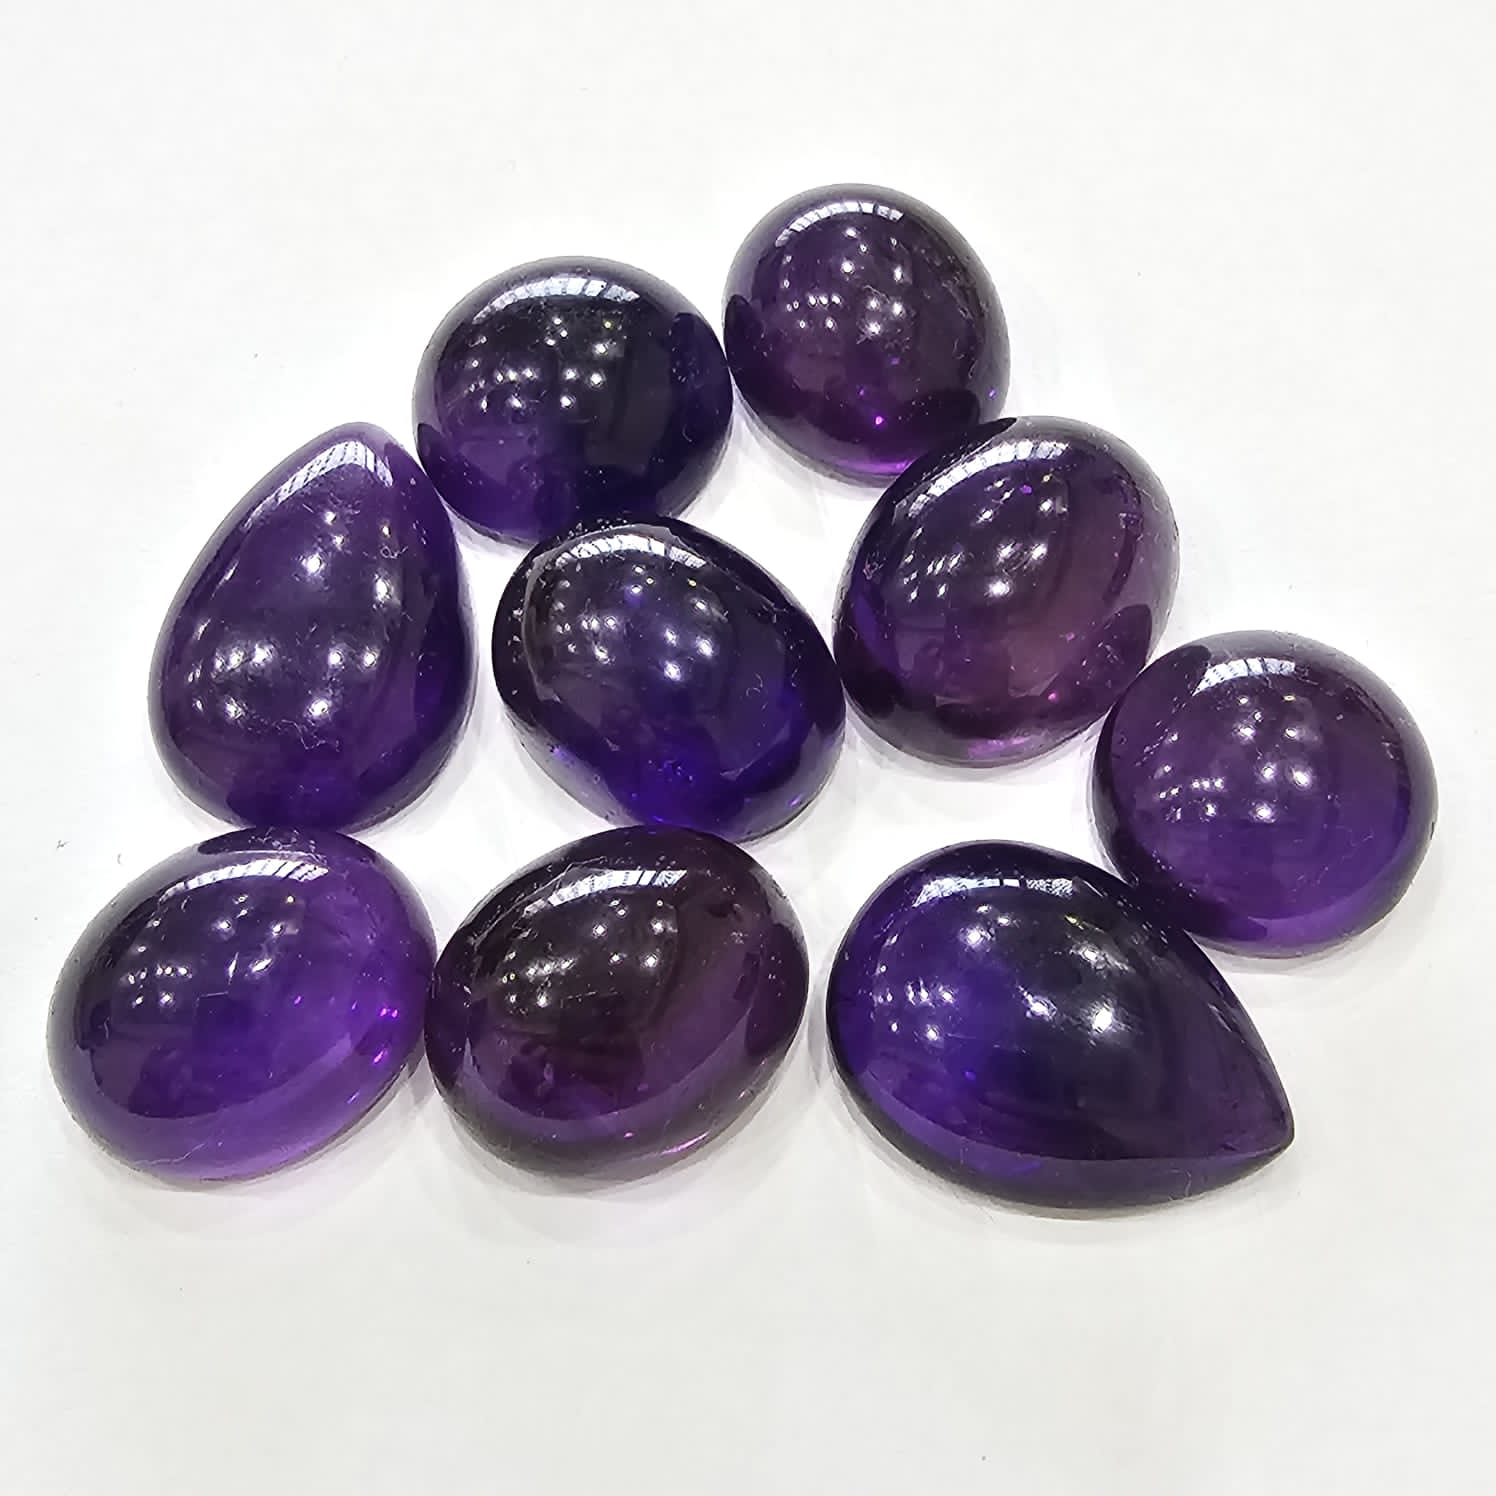 9 Pcs of Natural Amethyst Cabochon AAA Top Quality 20-28mm Size - The LabradoriteKing